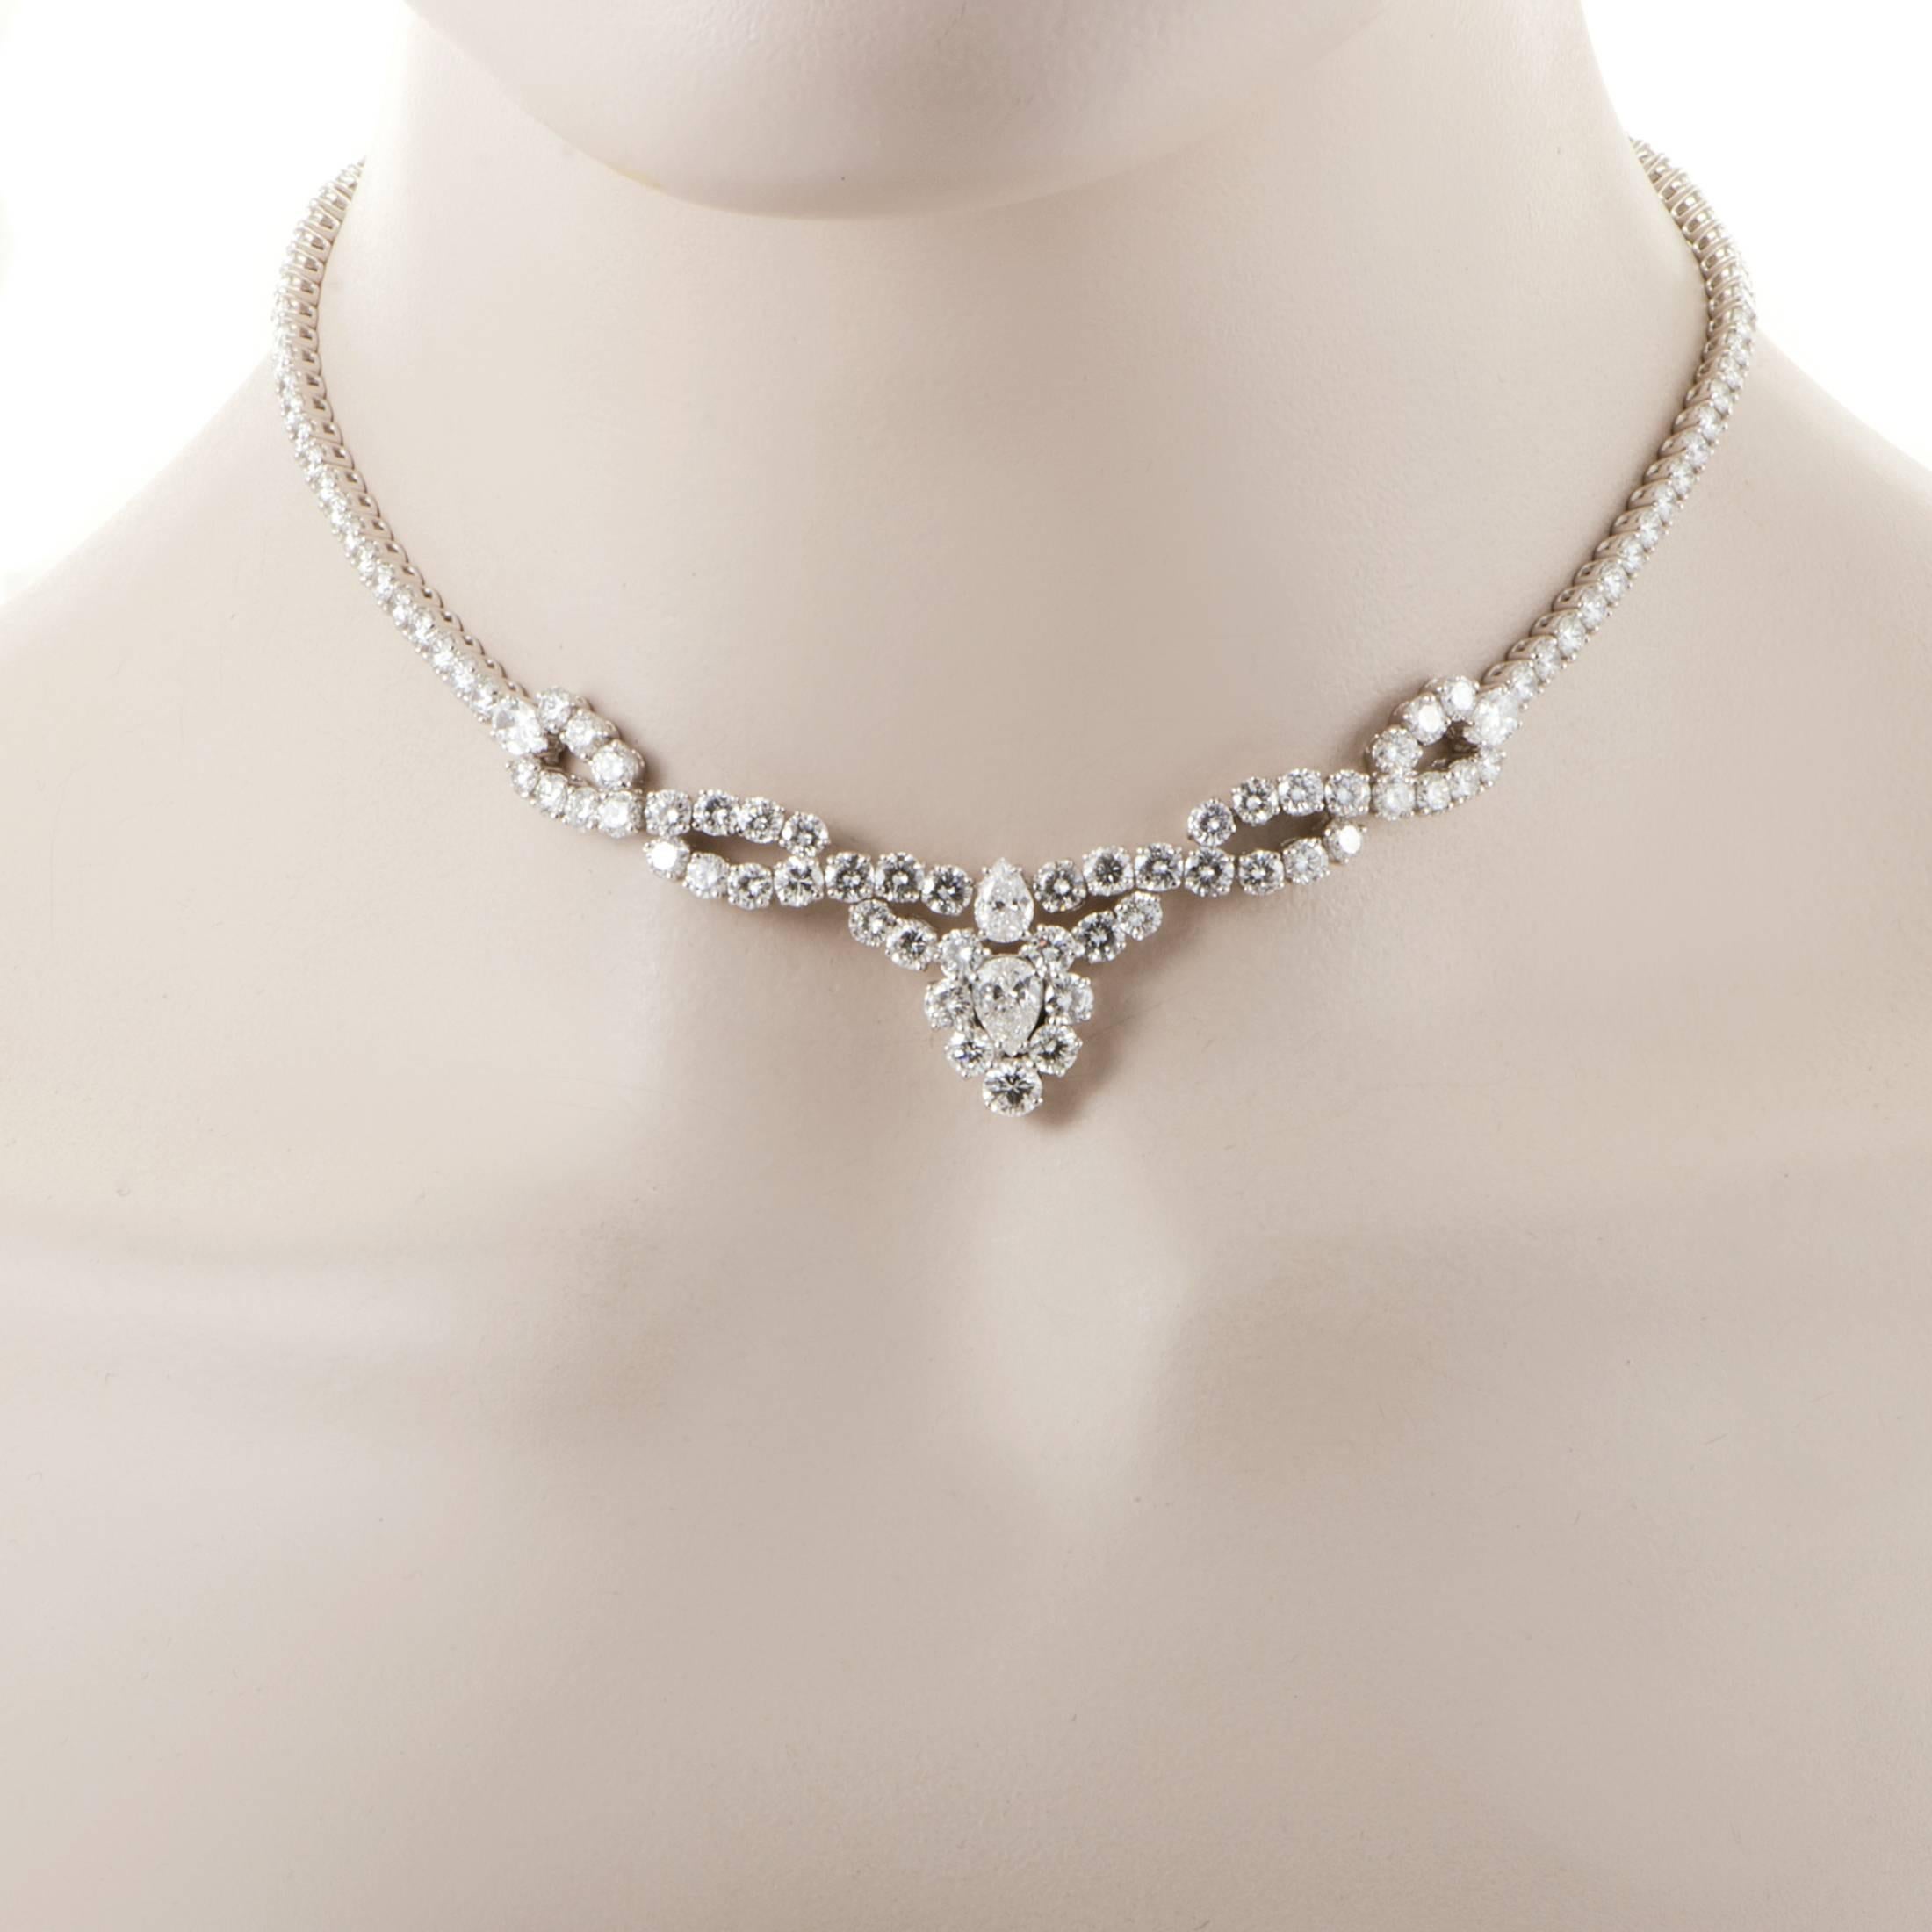 A spellbinding embodiment of unblemished prestige and lavish elegance, this astonishing necklace from Dior is exquisitely crafted from 18K white gold and adorned with resplendent F-color diamonds of VVS clarity weighing in total staggering 21.00